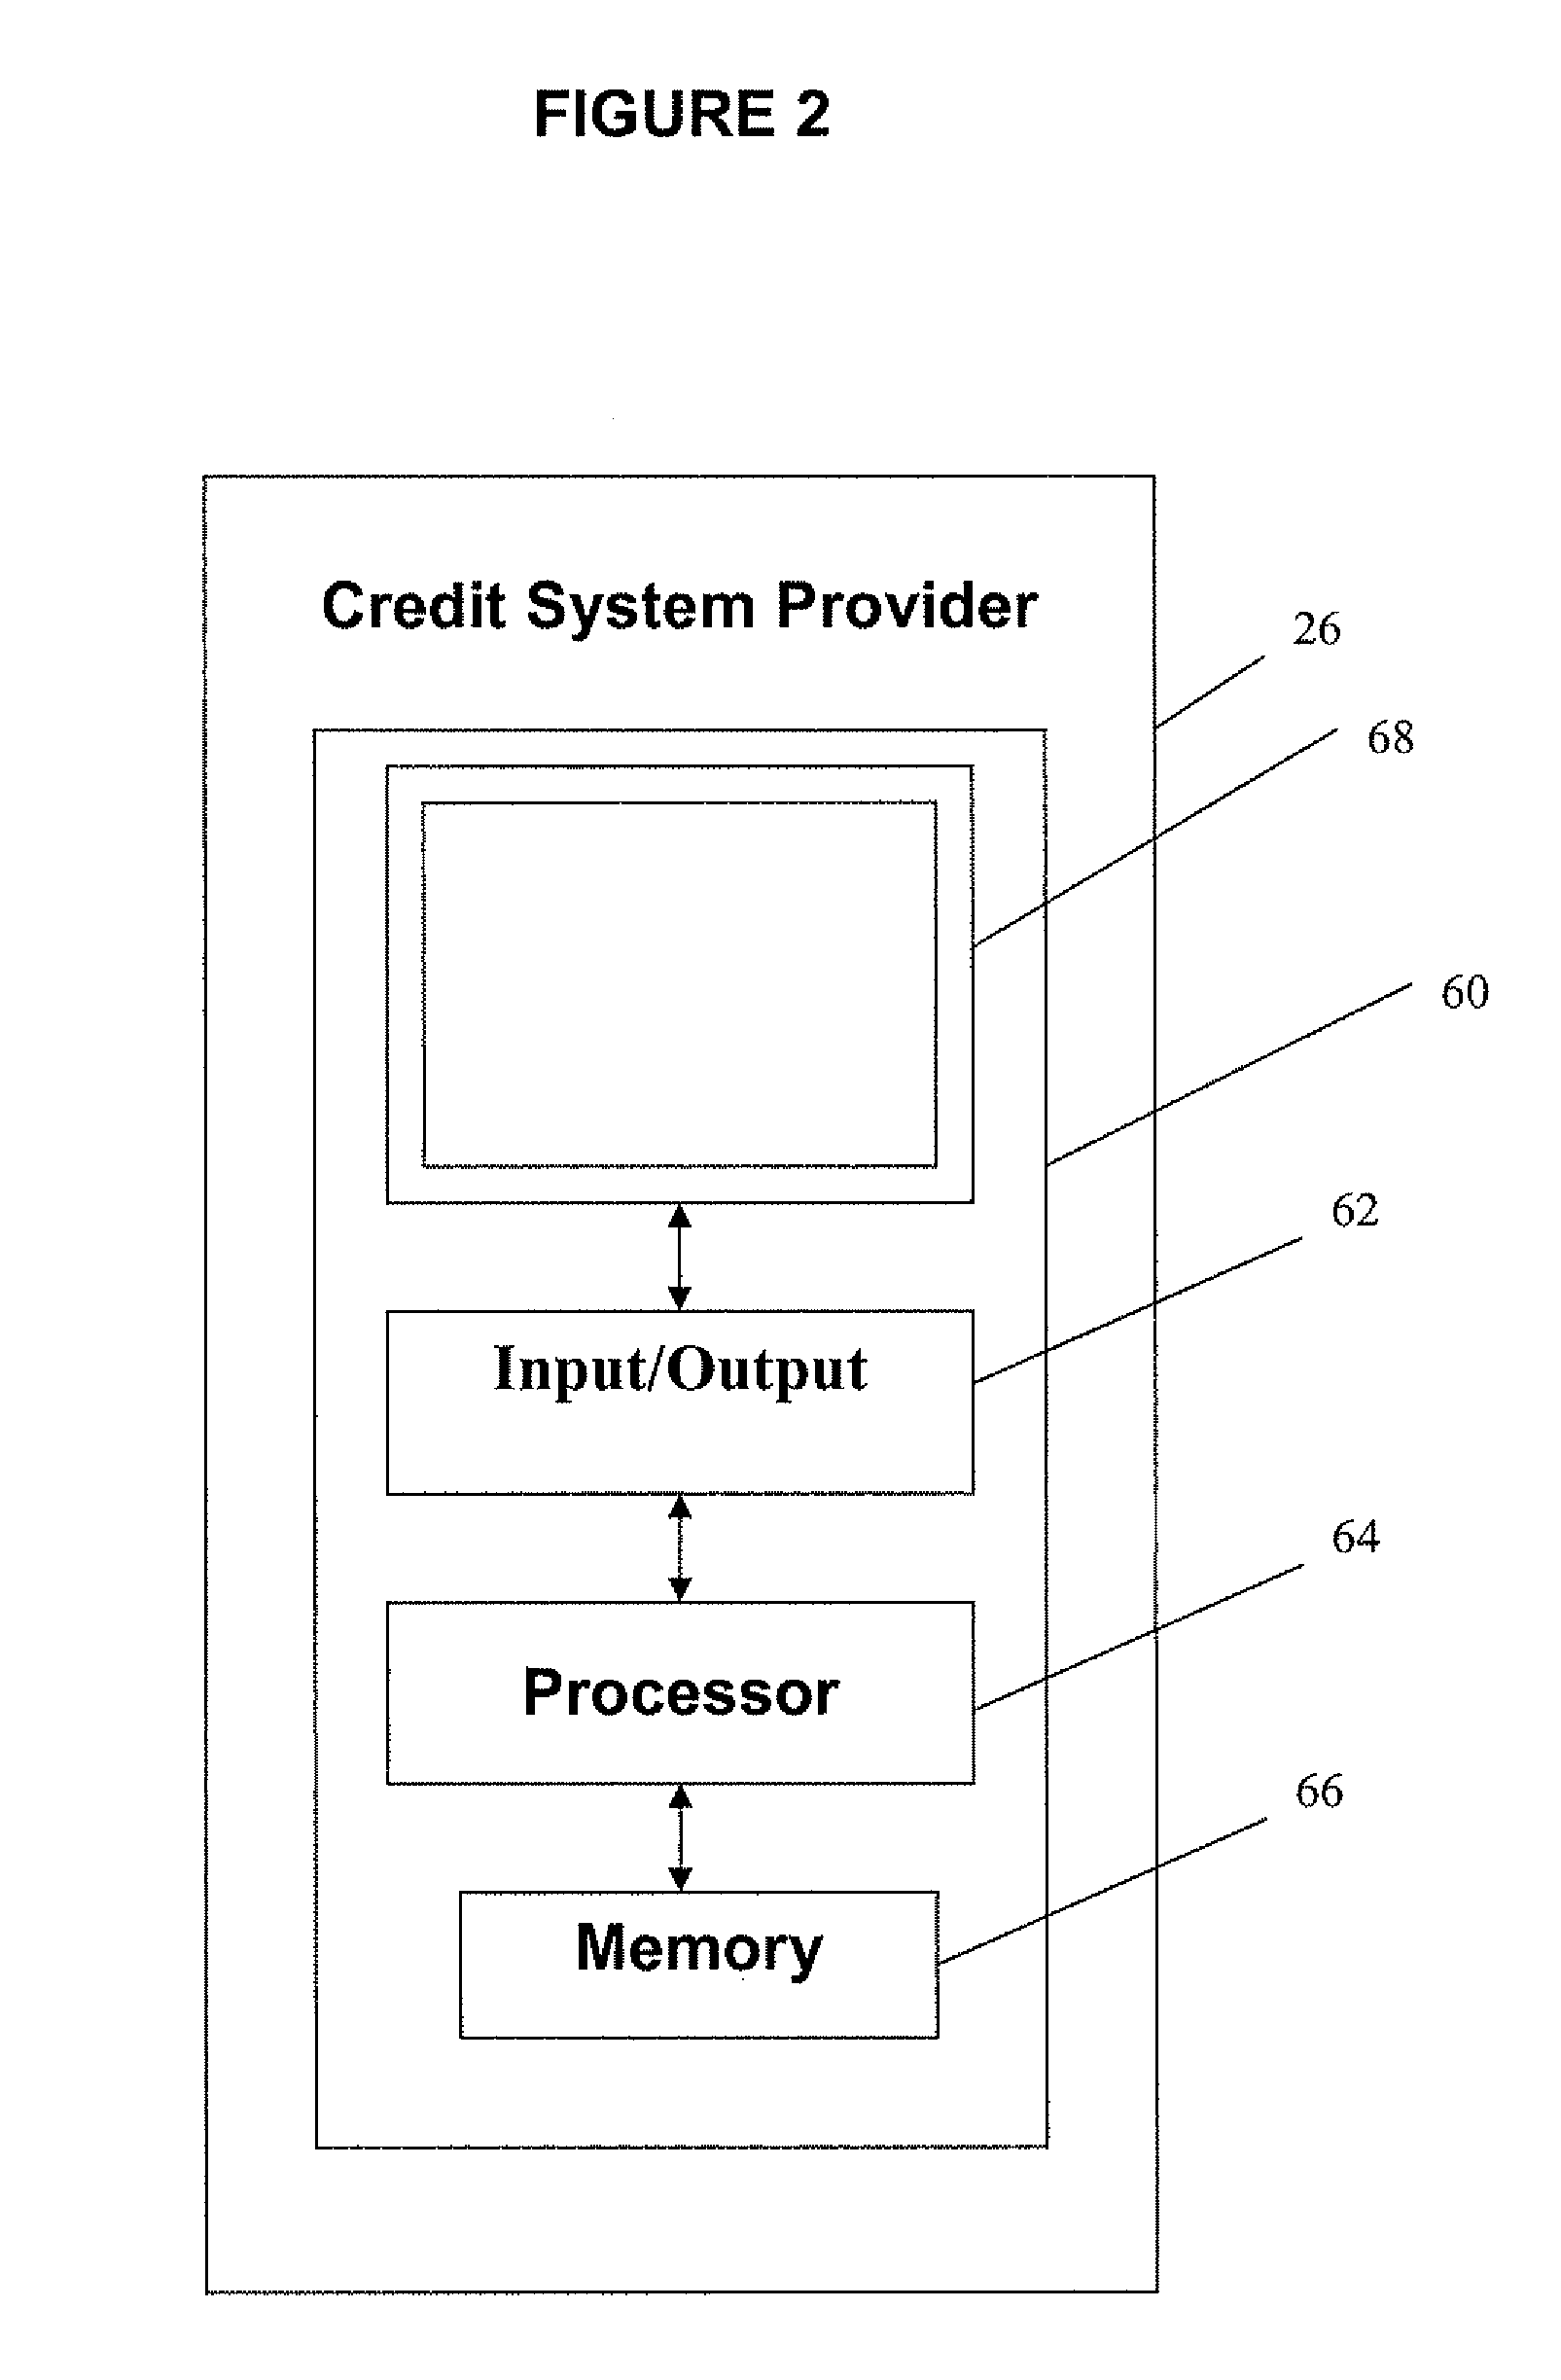 Computerized extension of credit to existing demand deposit accounts, prepaid cards and lines of credit based on expected tax refund proceeds, associated systems and computer program products